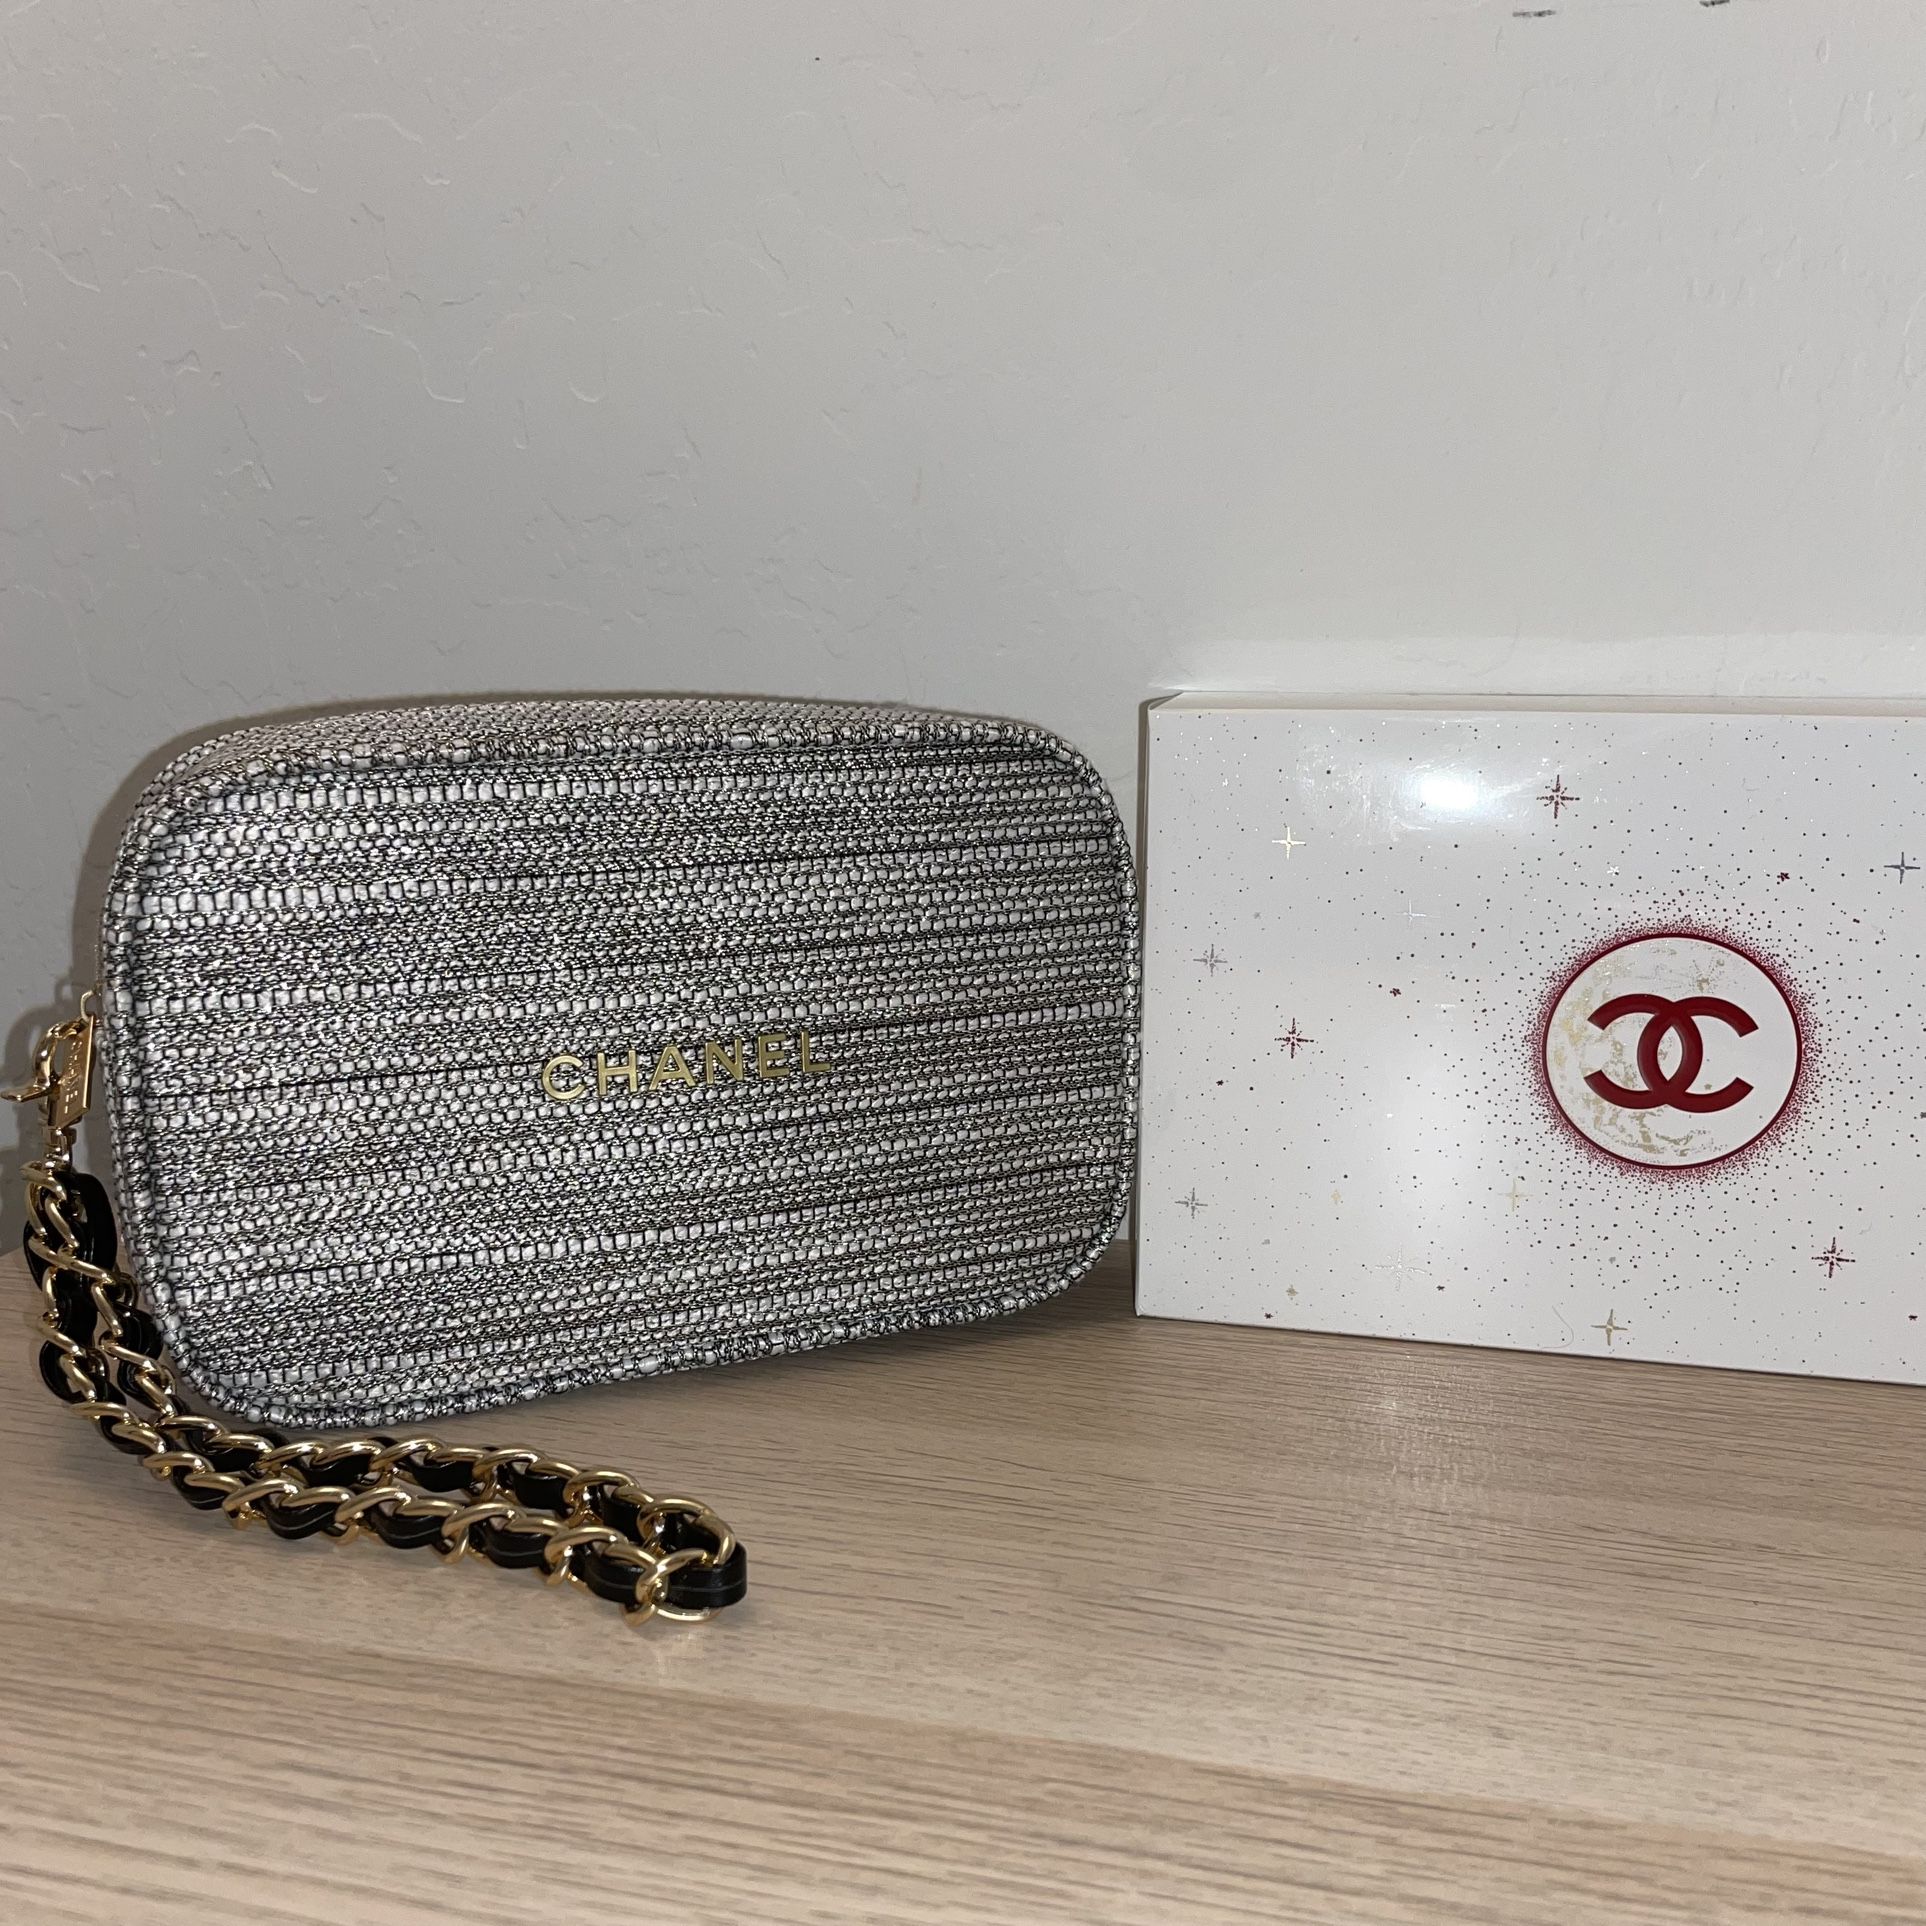 Where can I find this Chanel makeup pouch? : r/findfashion